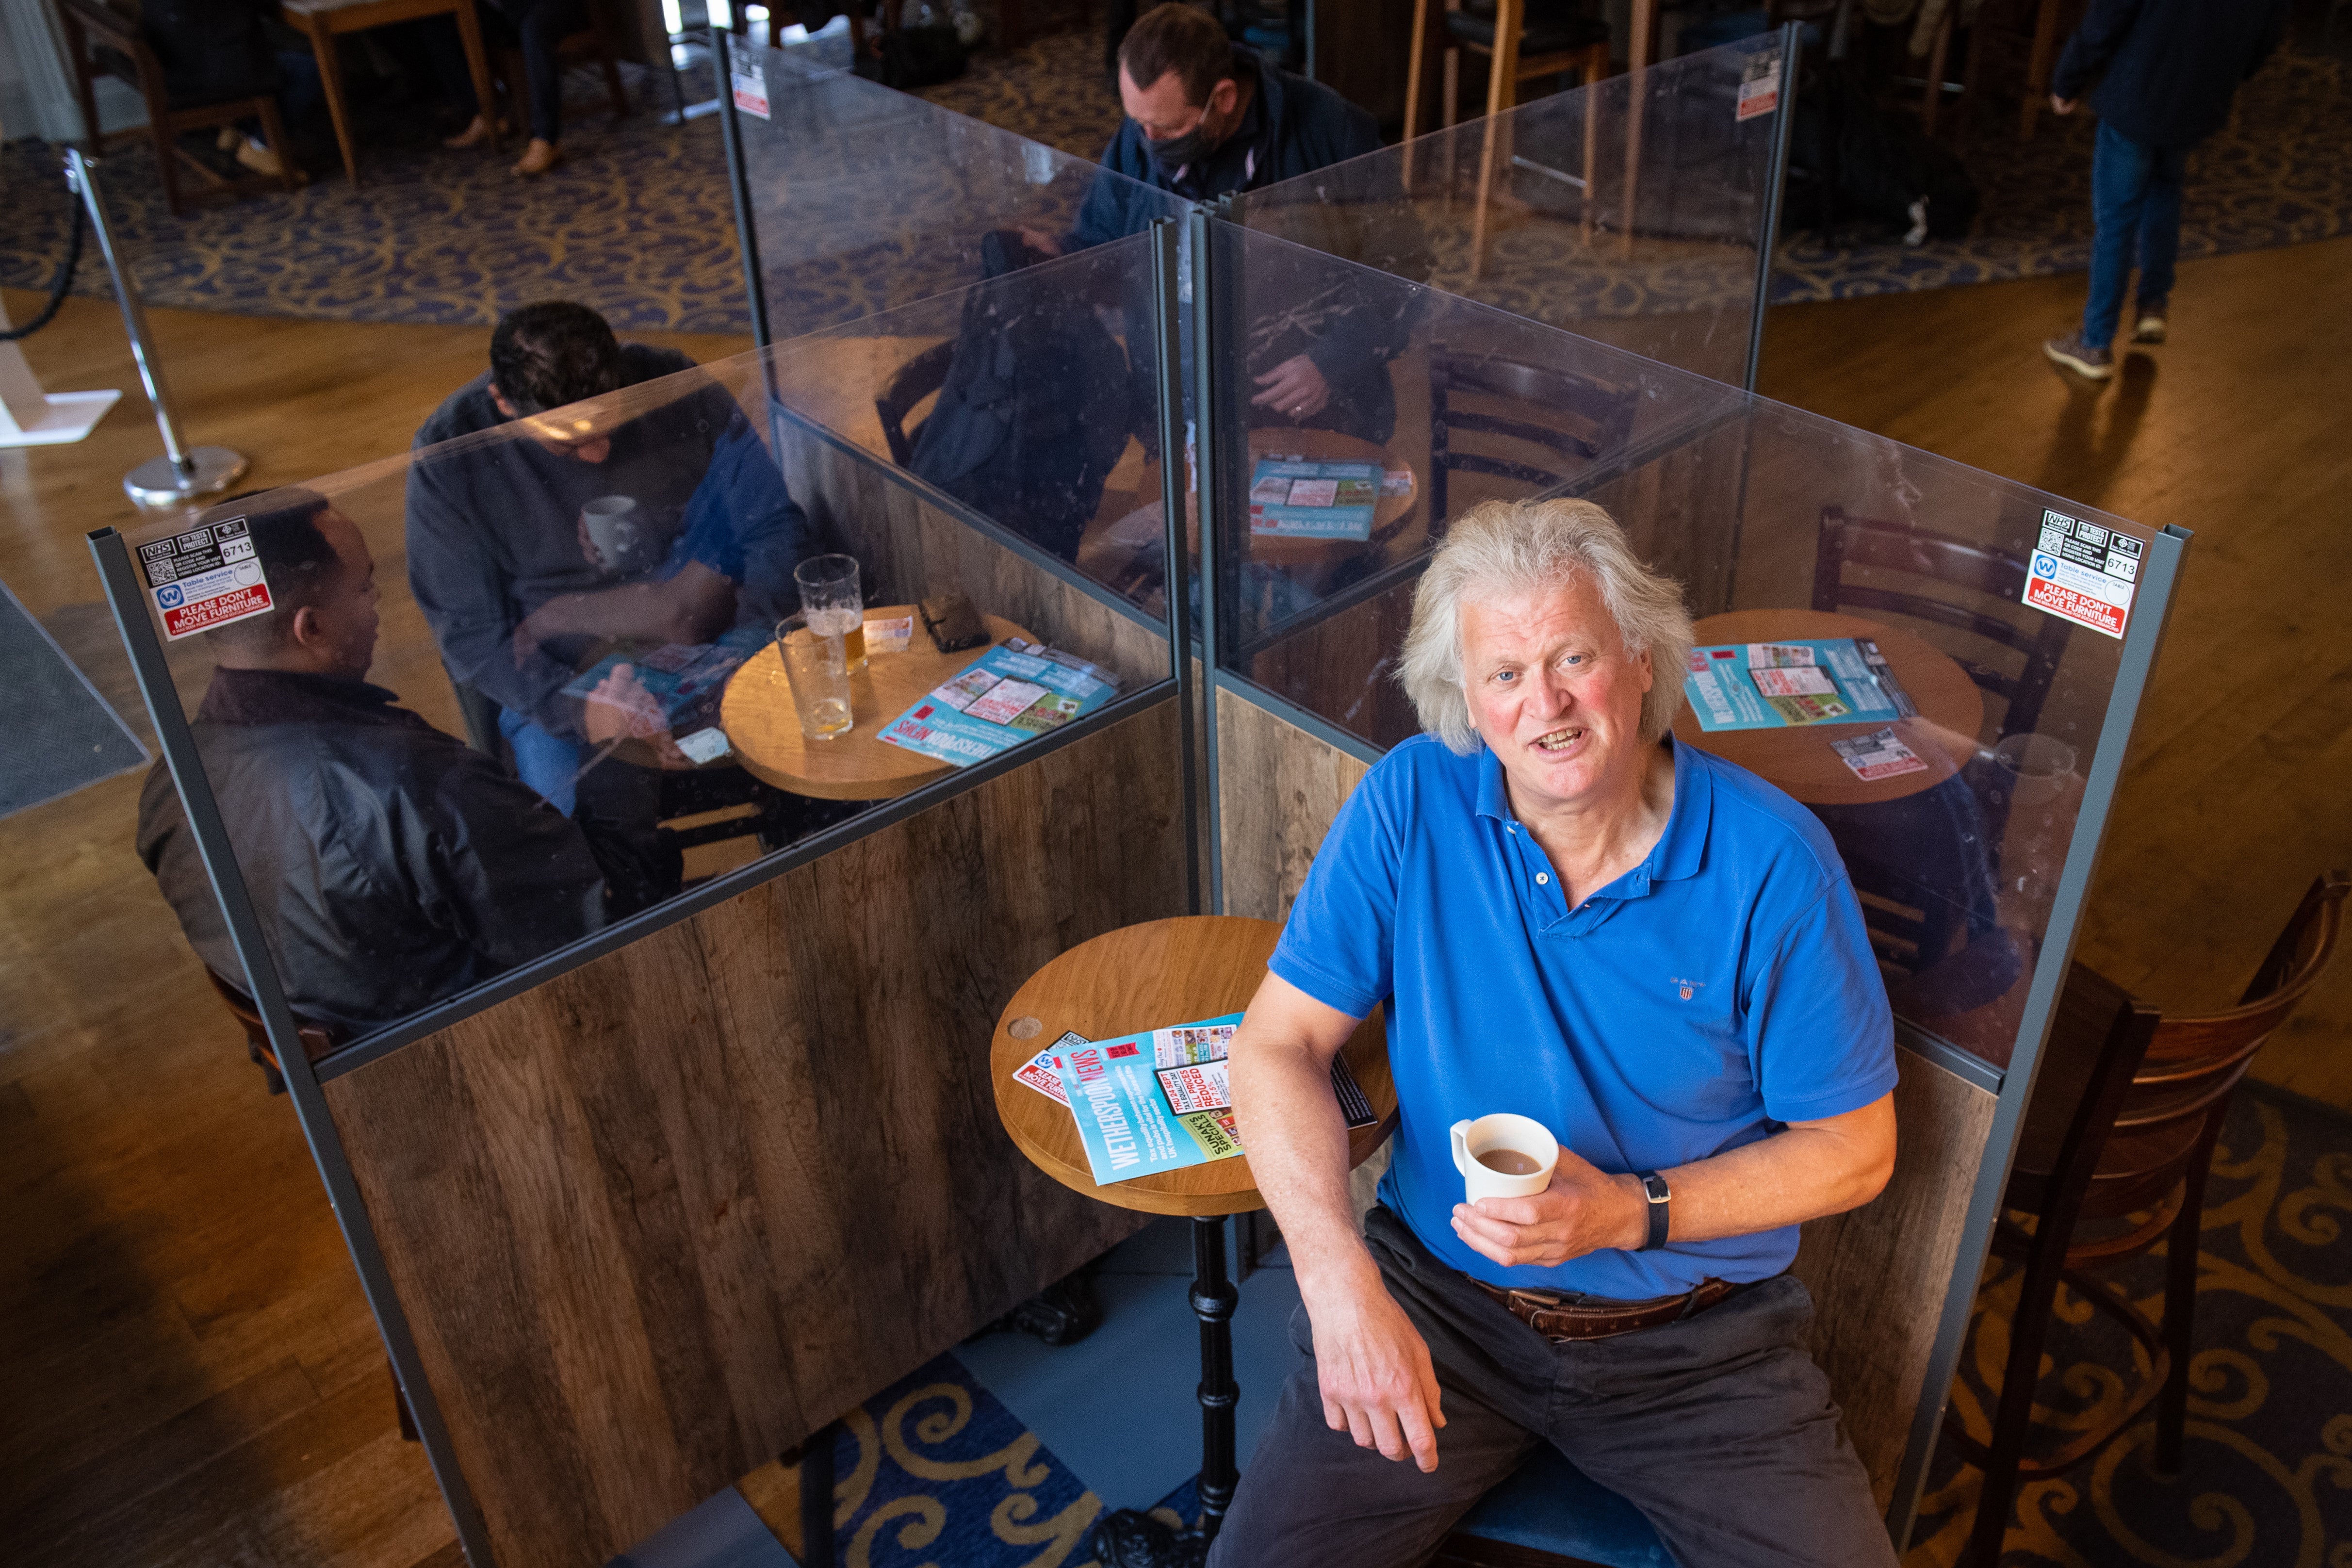 Founder of JD Wetherspoon Tim Martin said there was “no limit” on the price of a pint